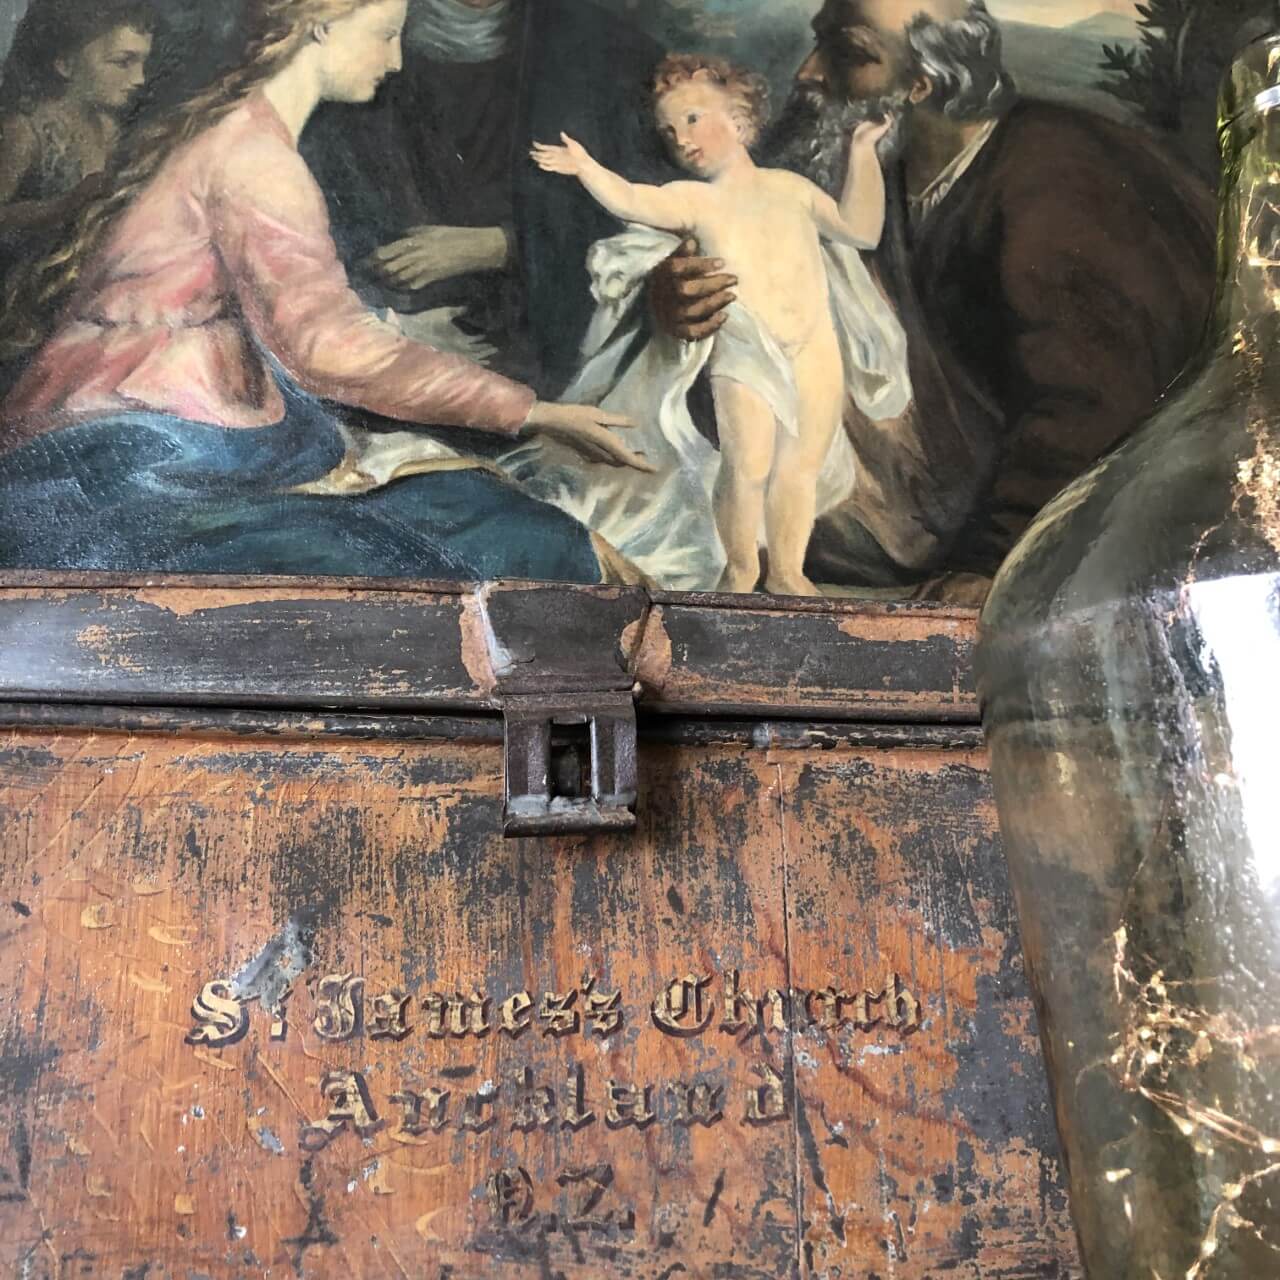 Antique painting and old Auckland trunk